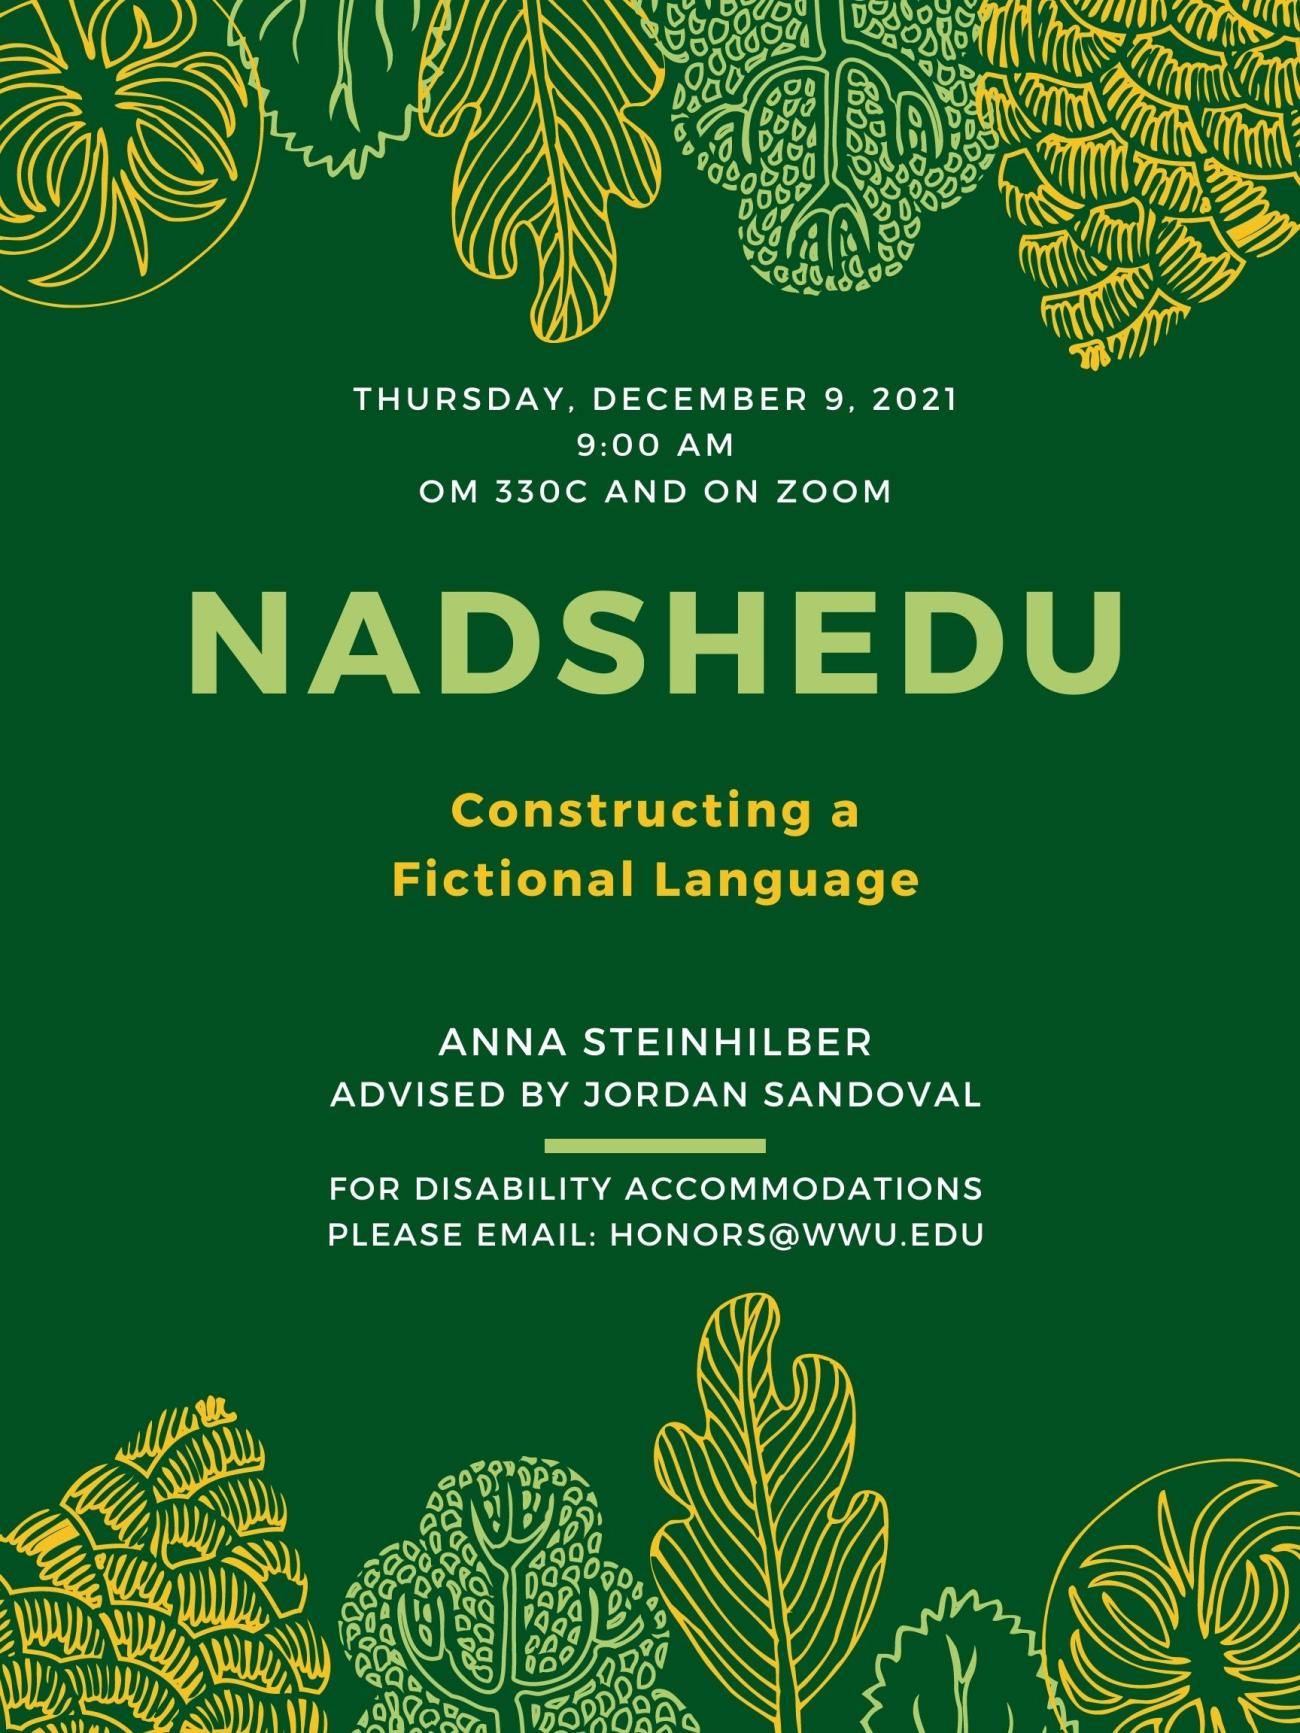 Thursday, December 9, 2021. 9:00 AM. OM 330C and on Zoom. Nadshedu: Constructing a Fictional Language. Anna Steinhilber. Advised by Jordan Sandoval. For disability accommodations please email: honors@wwu.edu